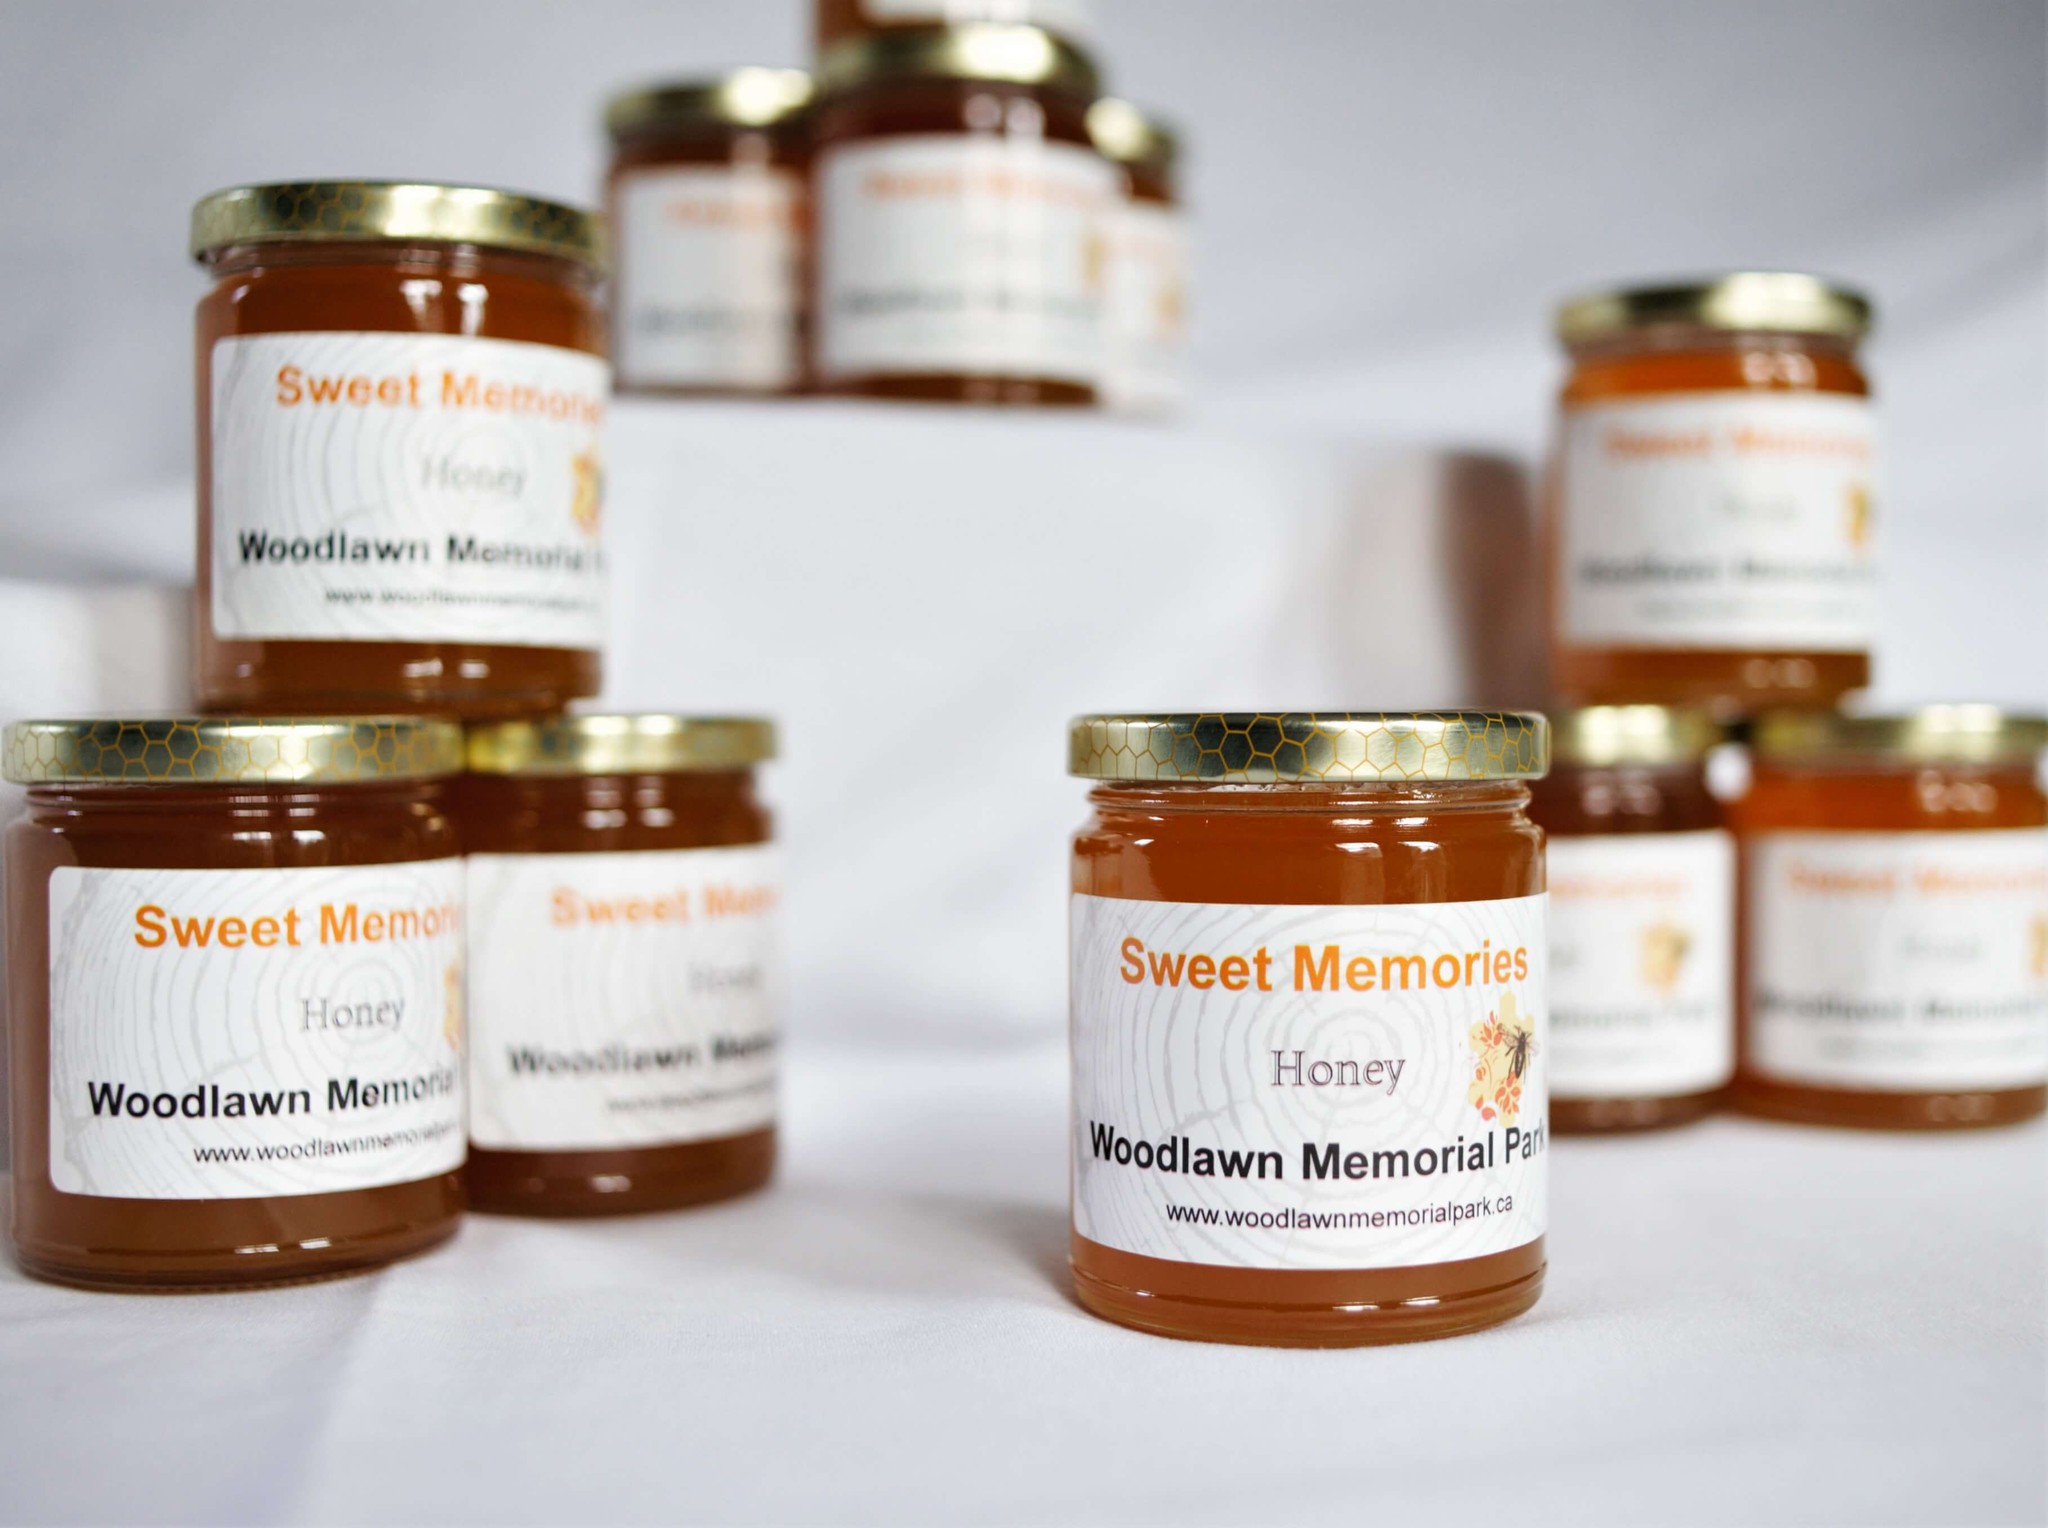 Sweet Memories honey made from the bees at Woodlawn Memorial Park that supports the Arbour Fund